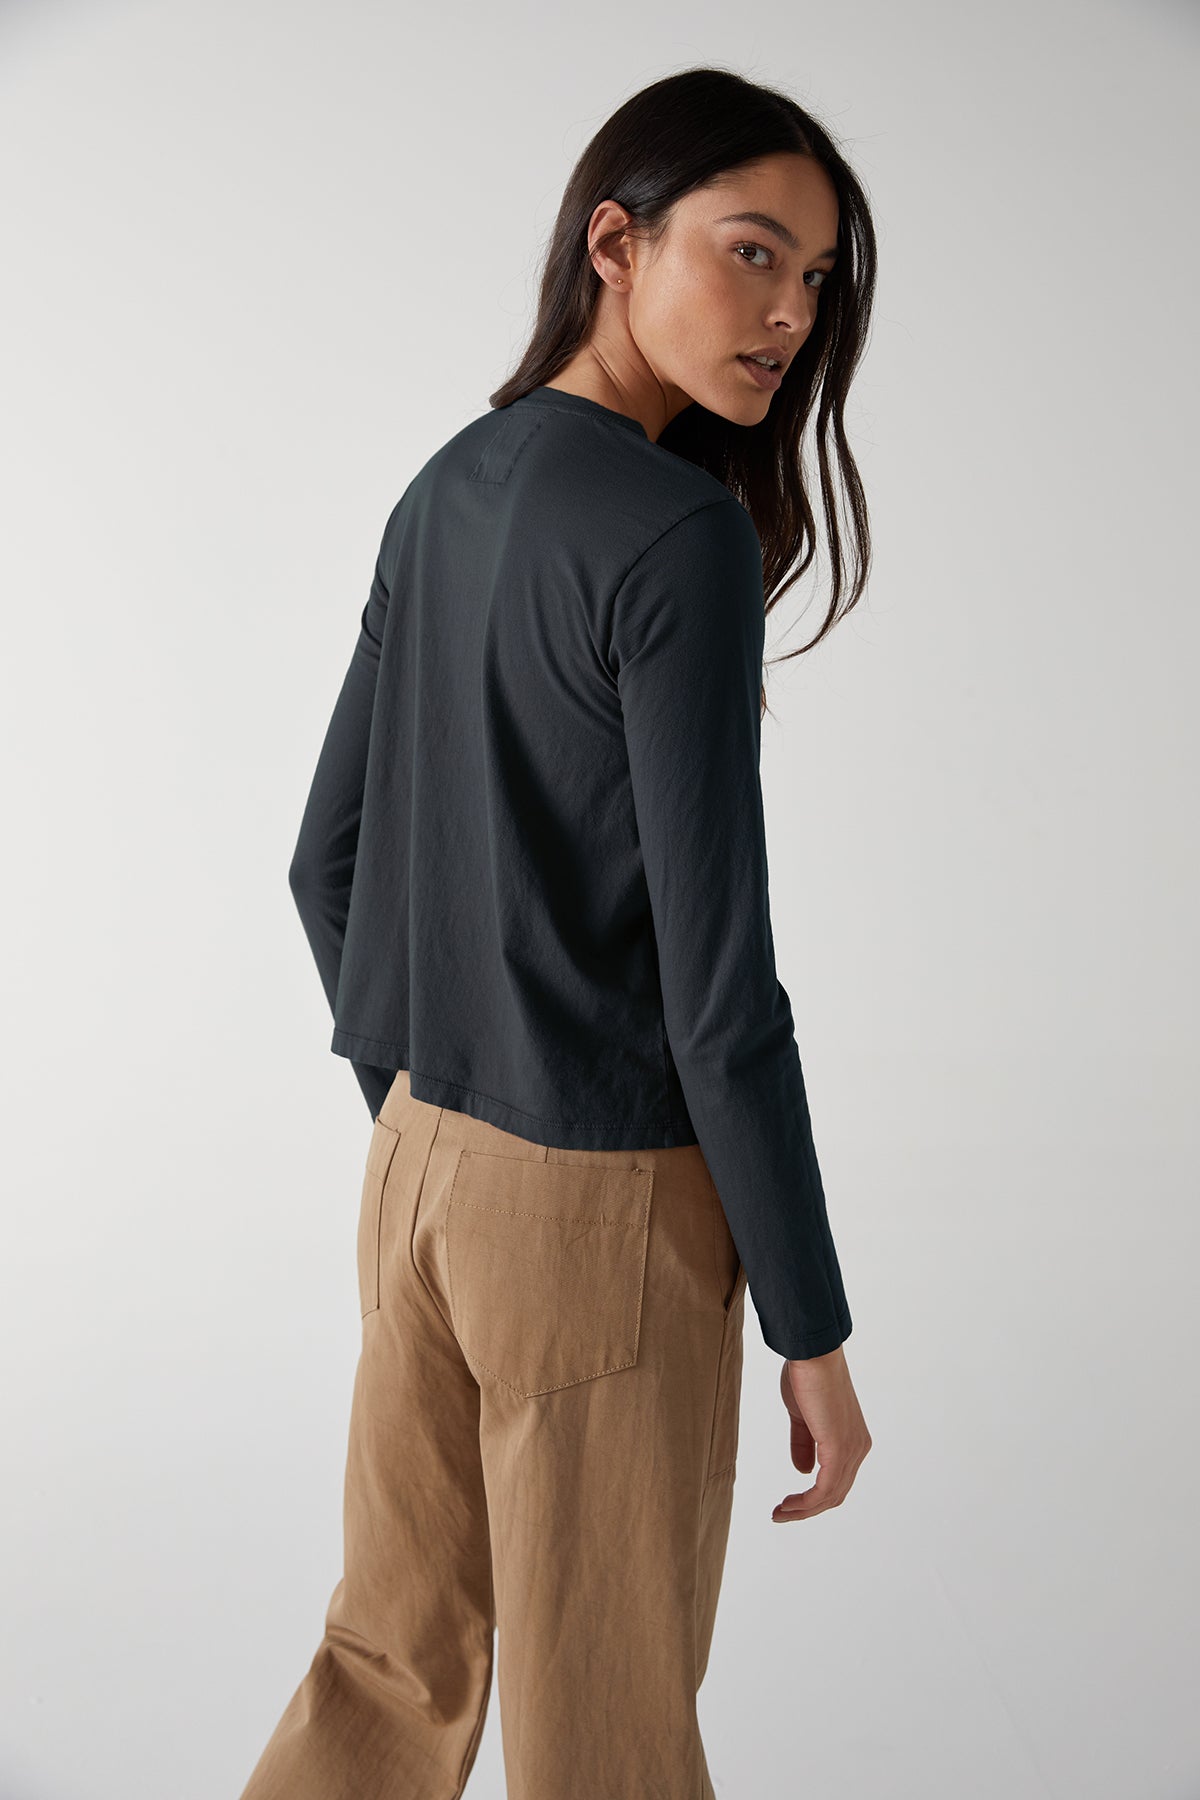 The back view of a woman wearing tan trousers and a black long sleeved VICENTE TEE by Velvet by Jenny Graham.-24427644125377